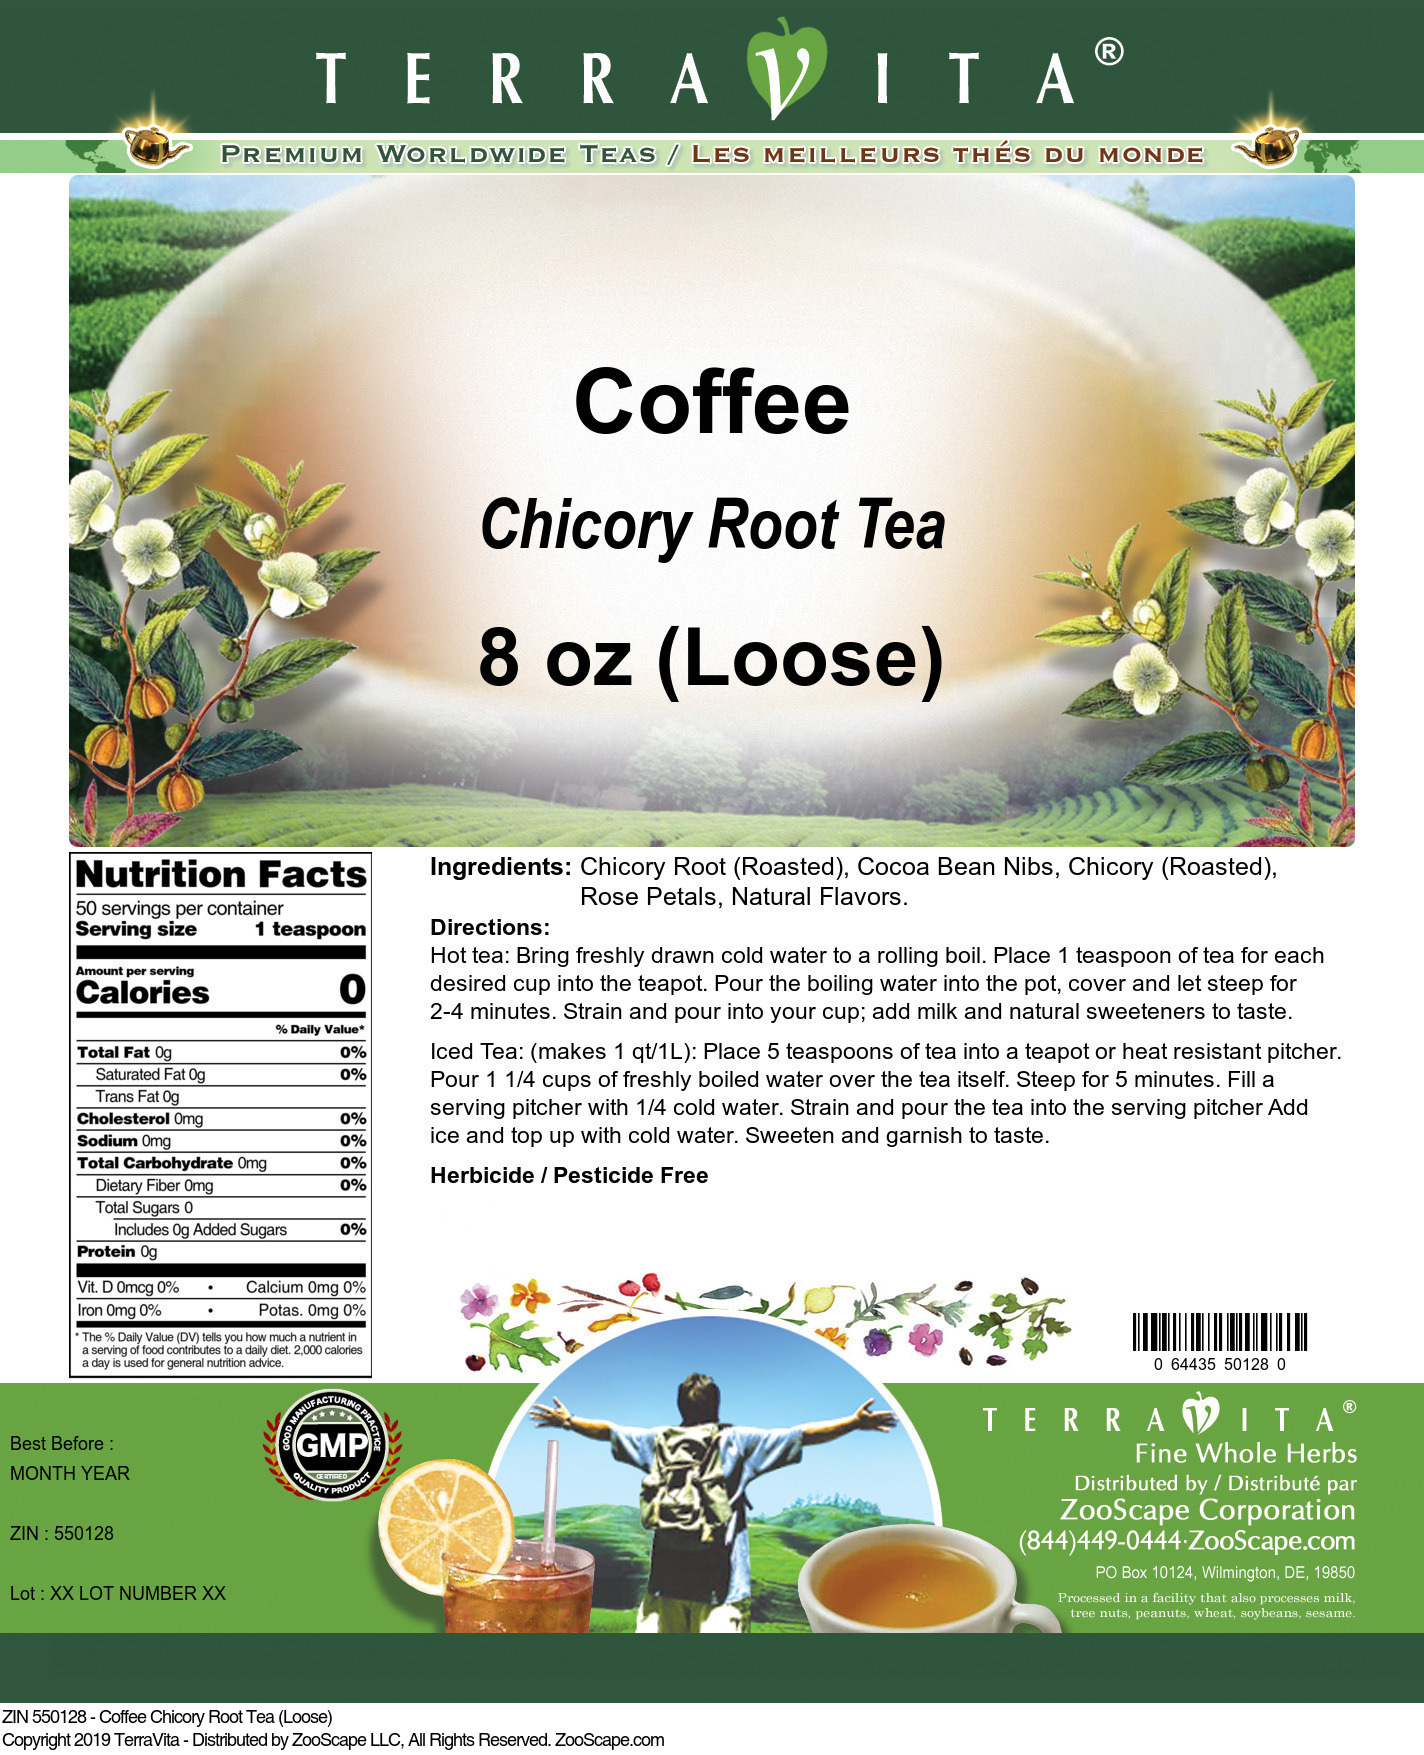 Coffee Chicory Root Tea (Loose) - Label